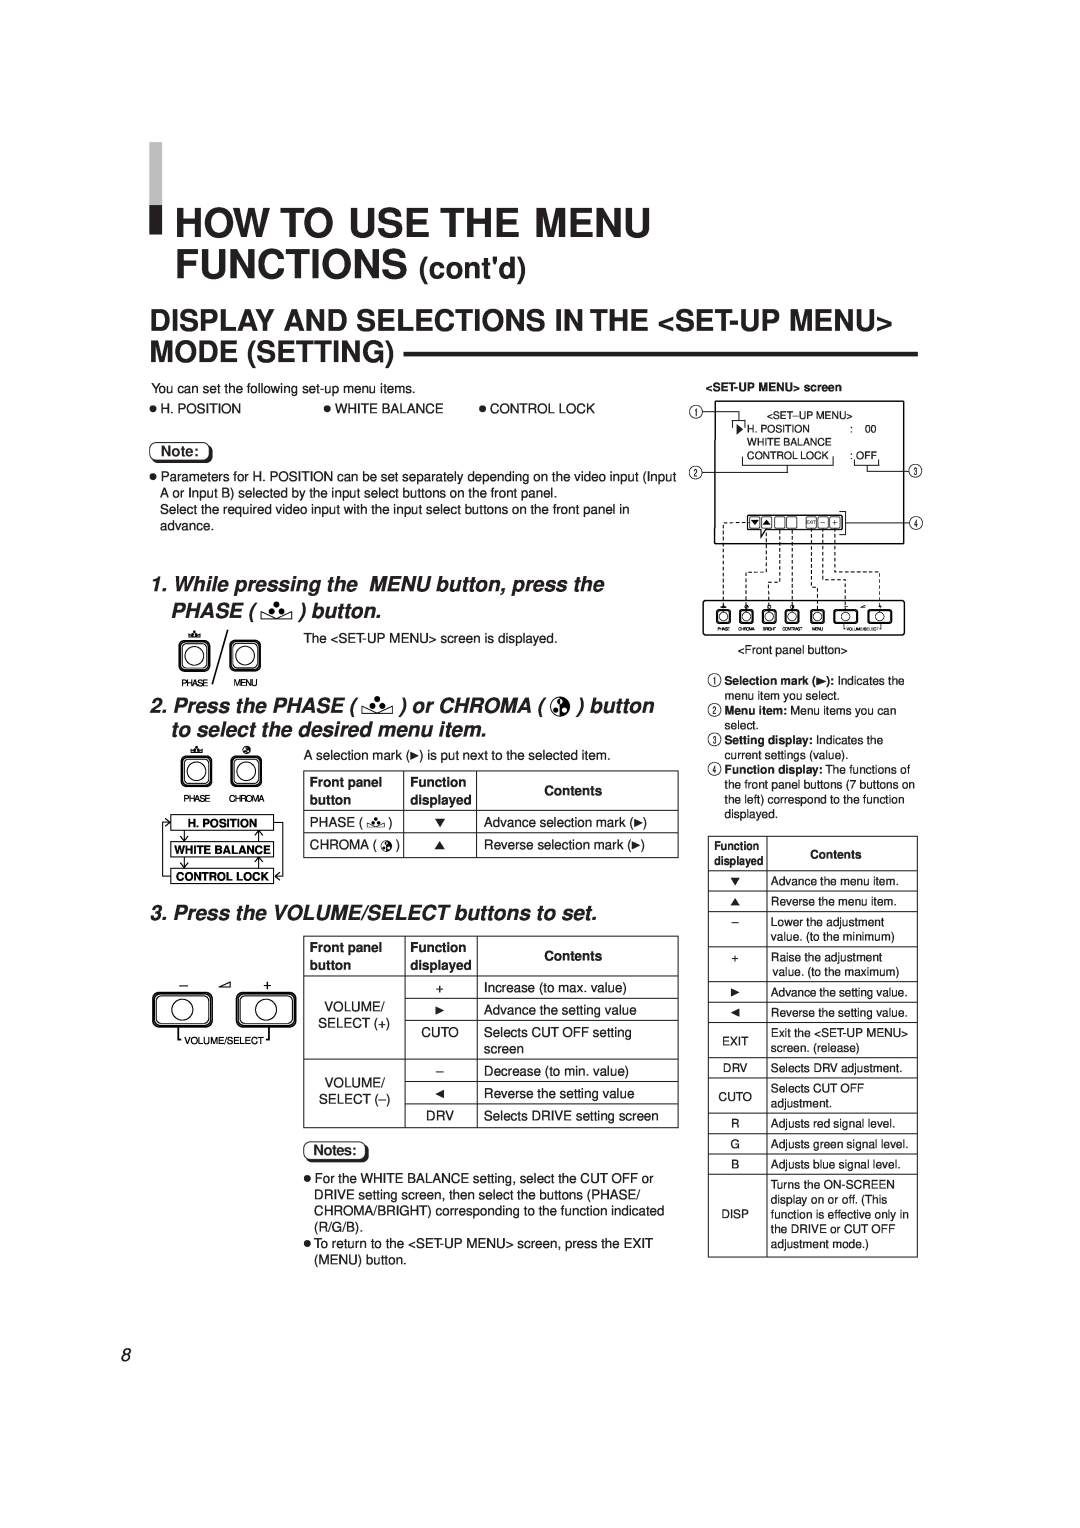 JVC TM-A130SU manual HOW TO USE THE MENU FUNCTIONS contd, Display And Selections In The Set-Up Menu Mode Setting 